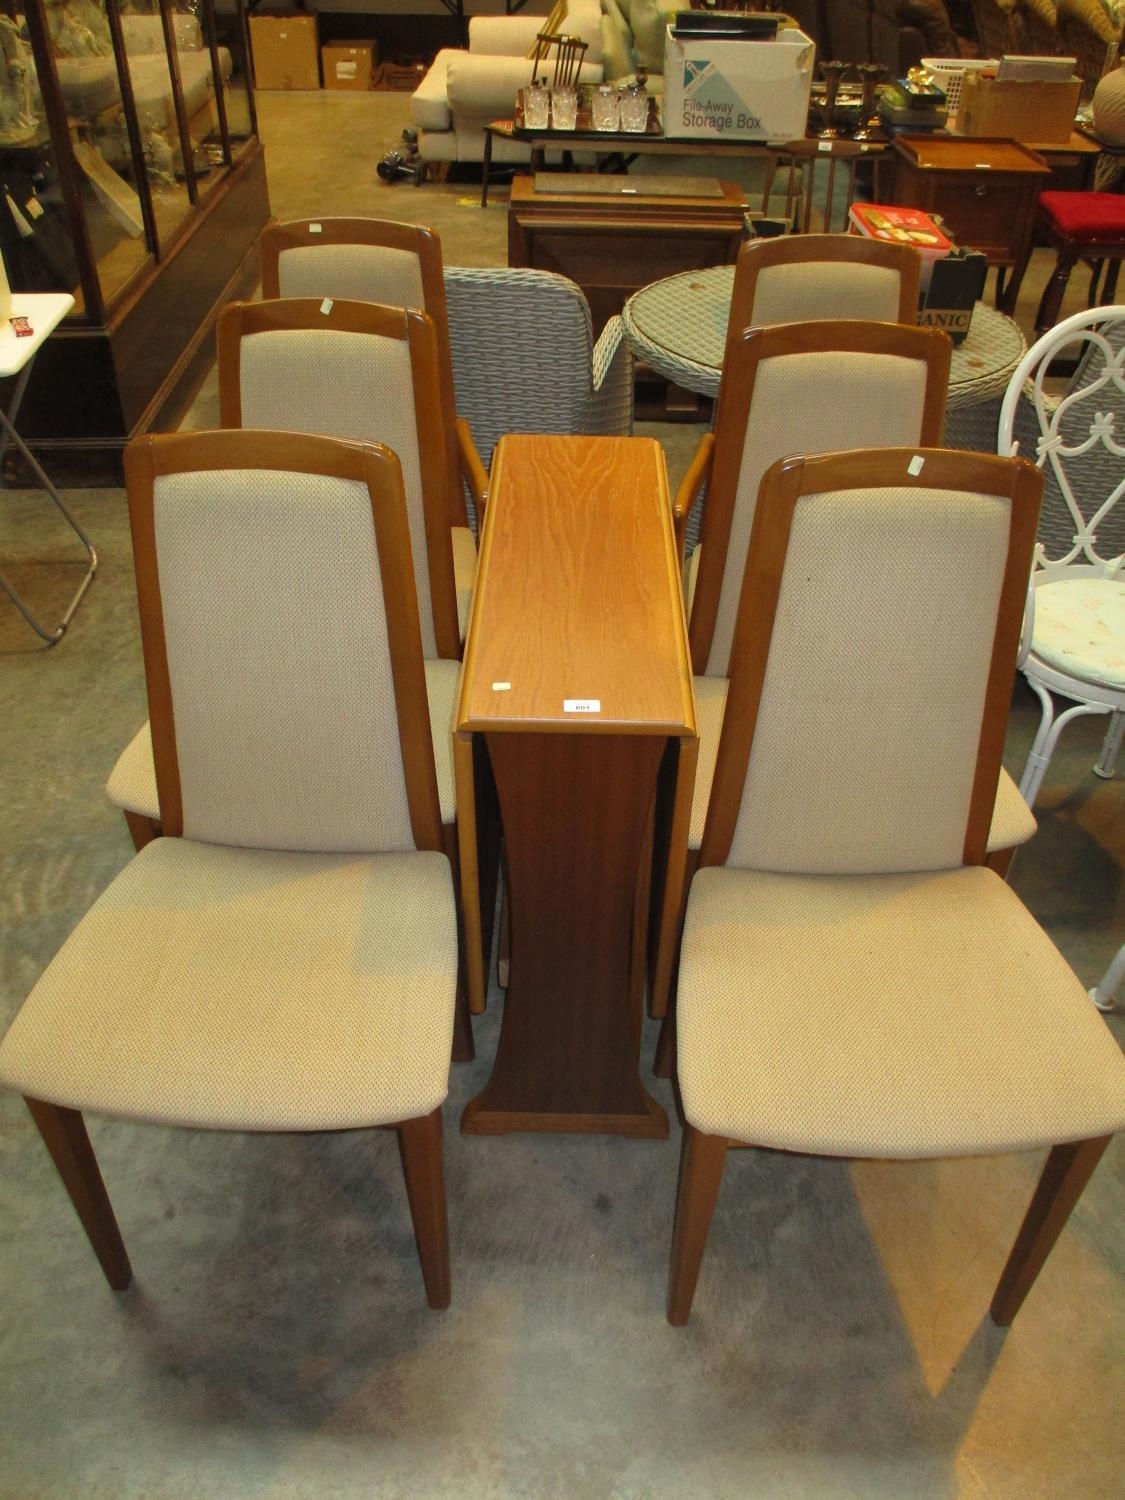 Teak Gateleg Dining Table with 6 Chairs